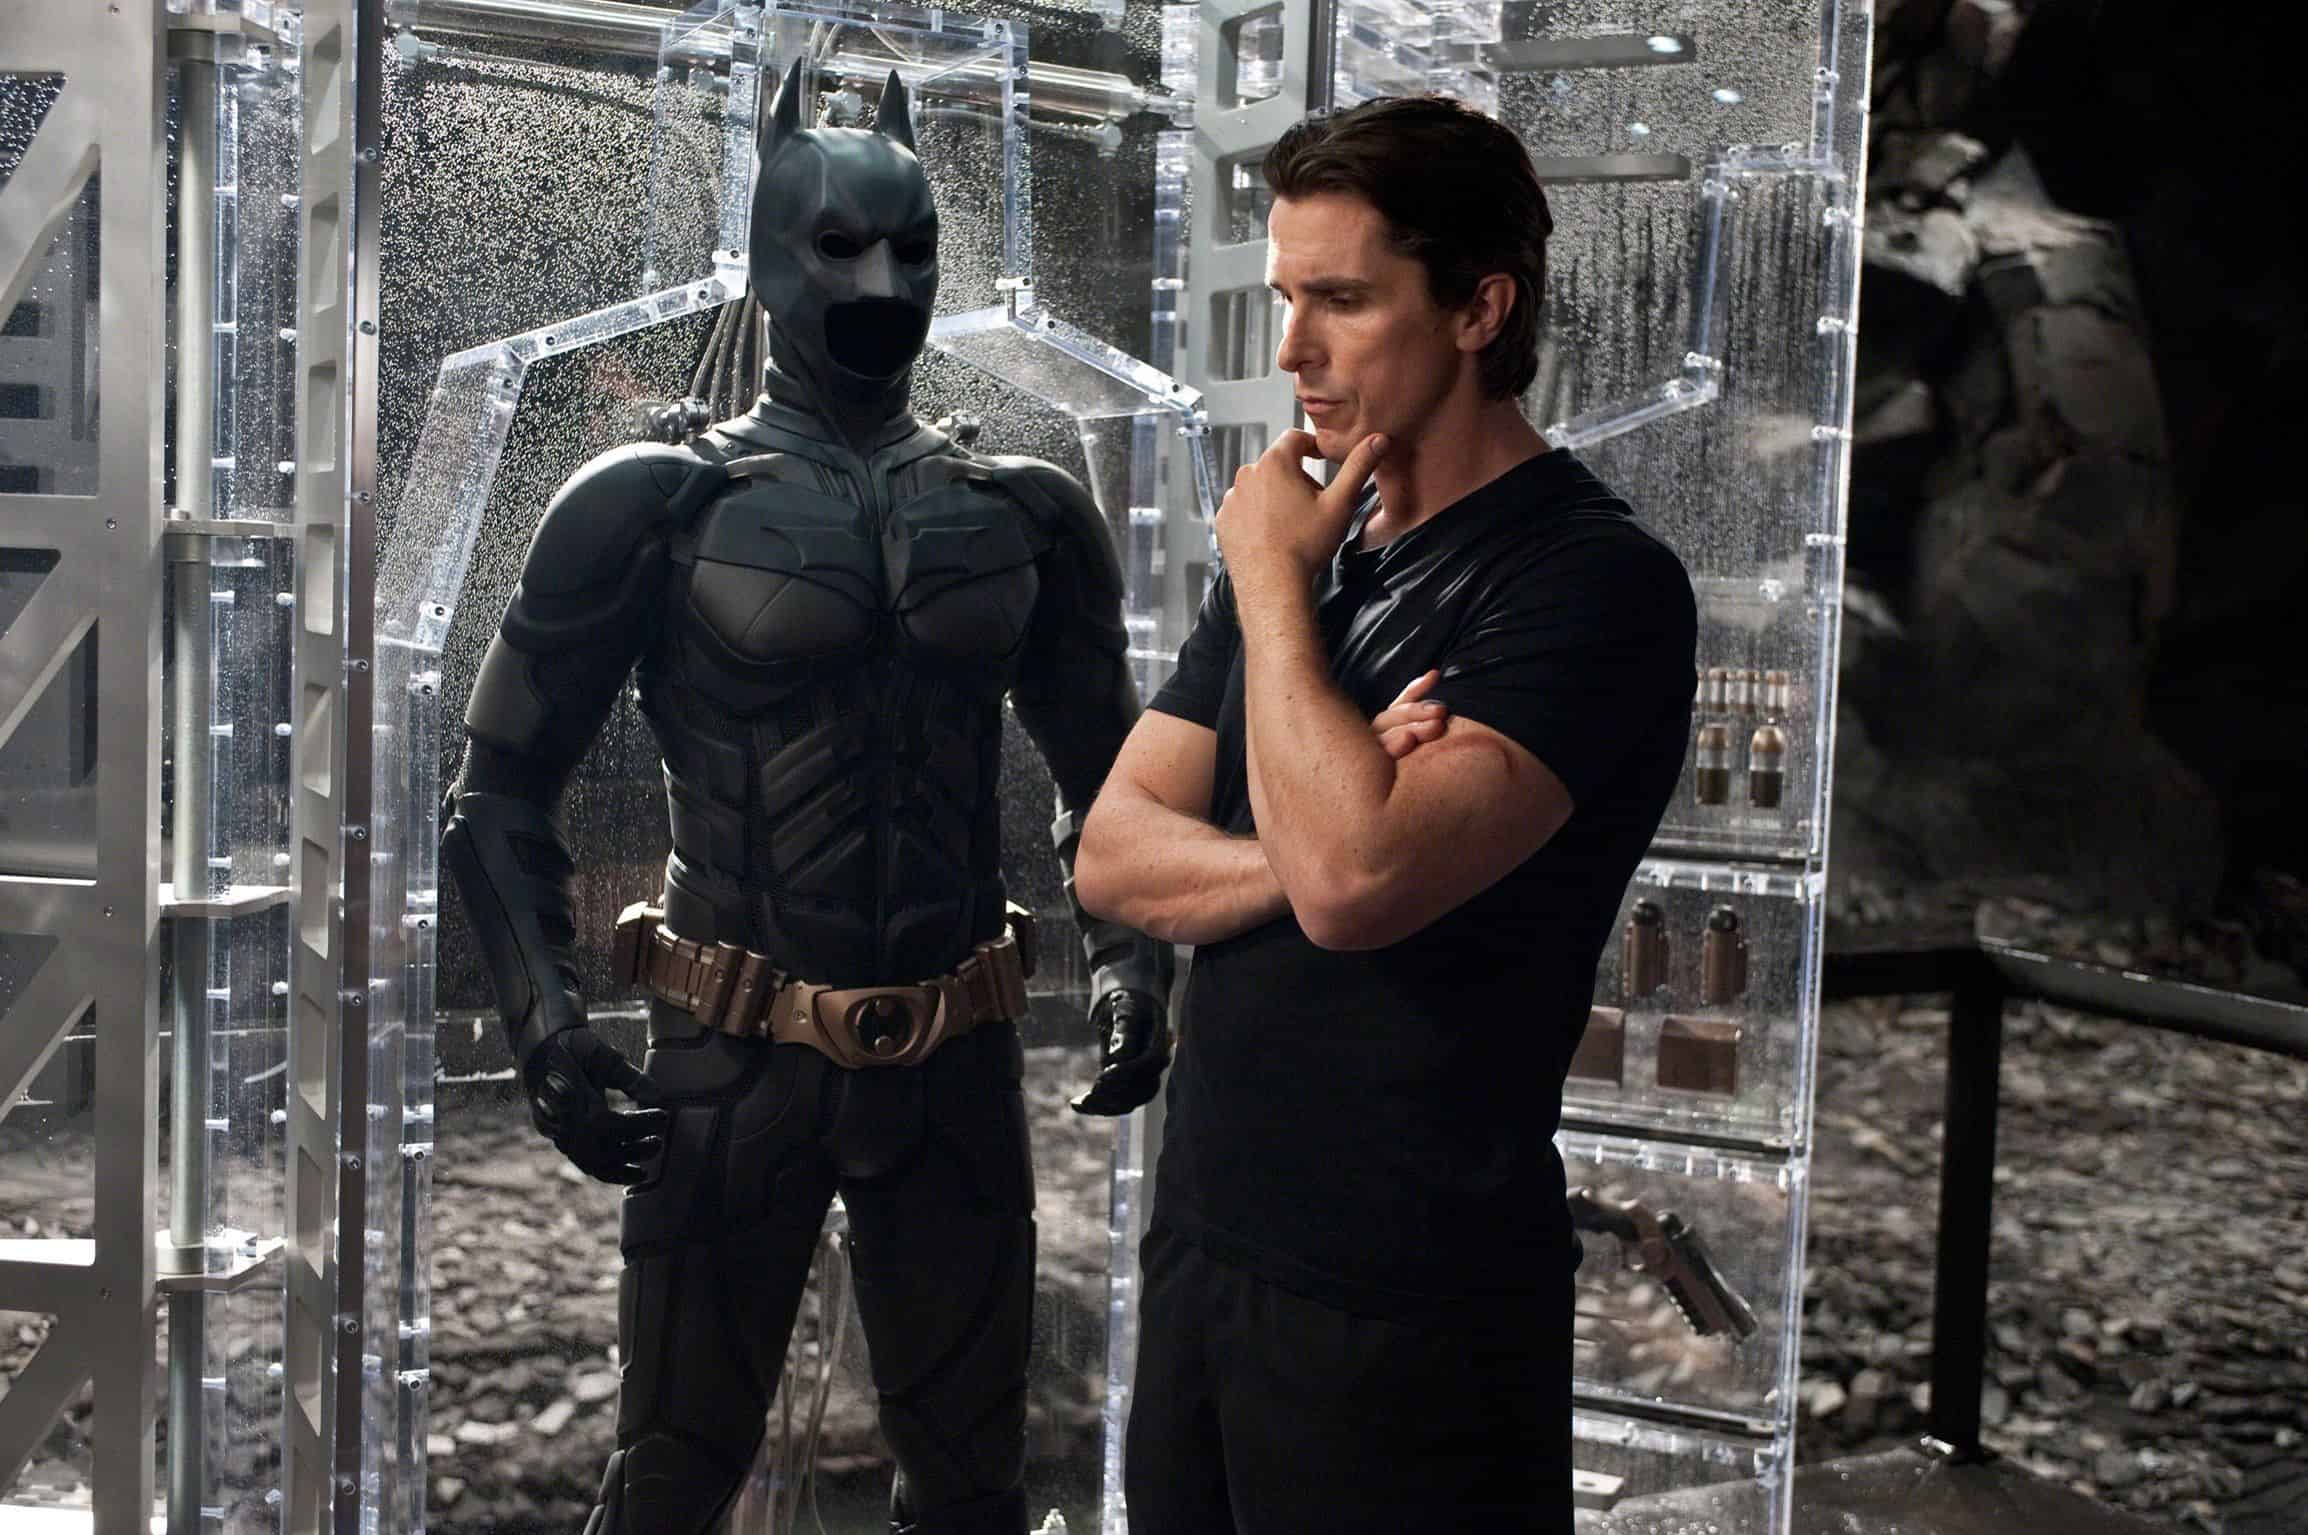 Christian Bale in The Dark Knight Rises (2012)